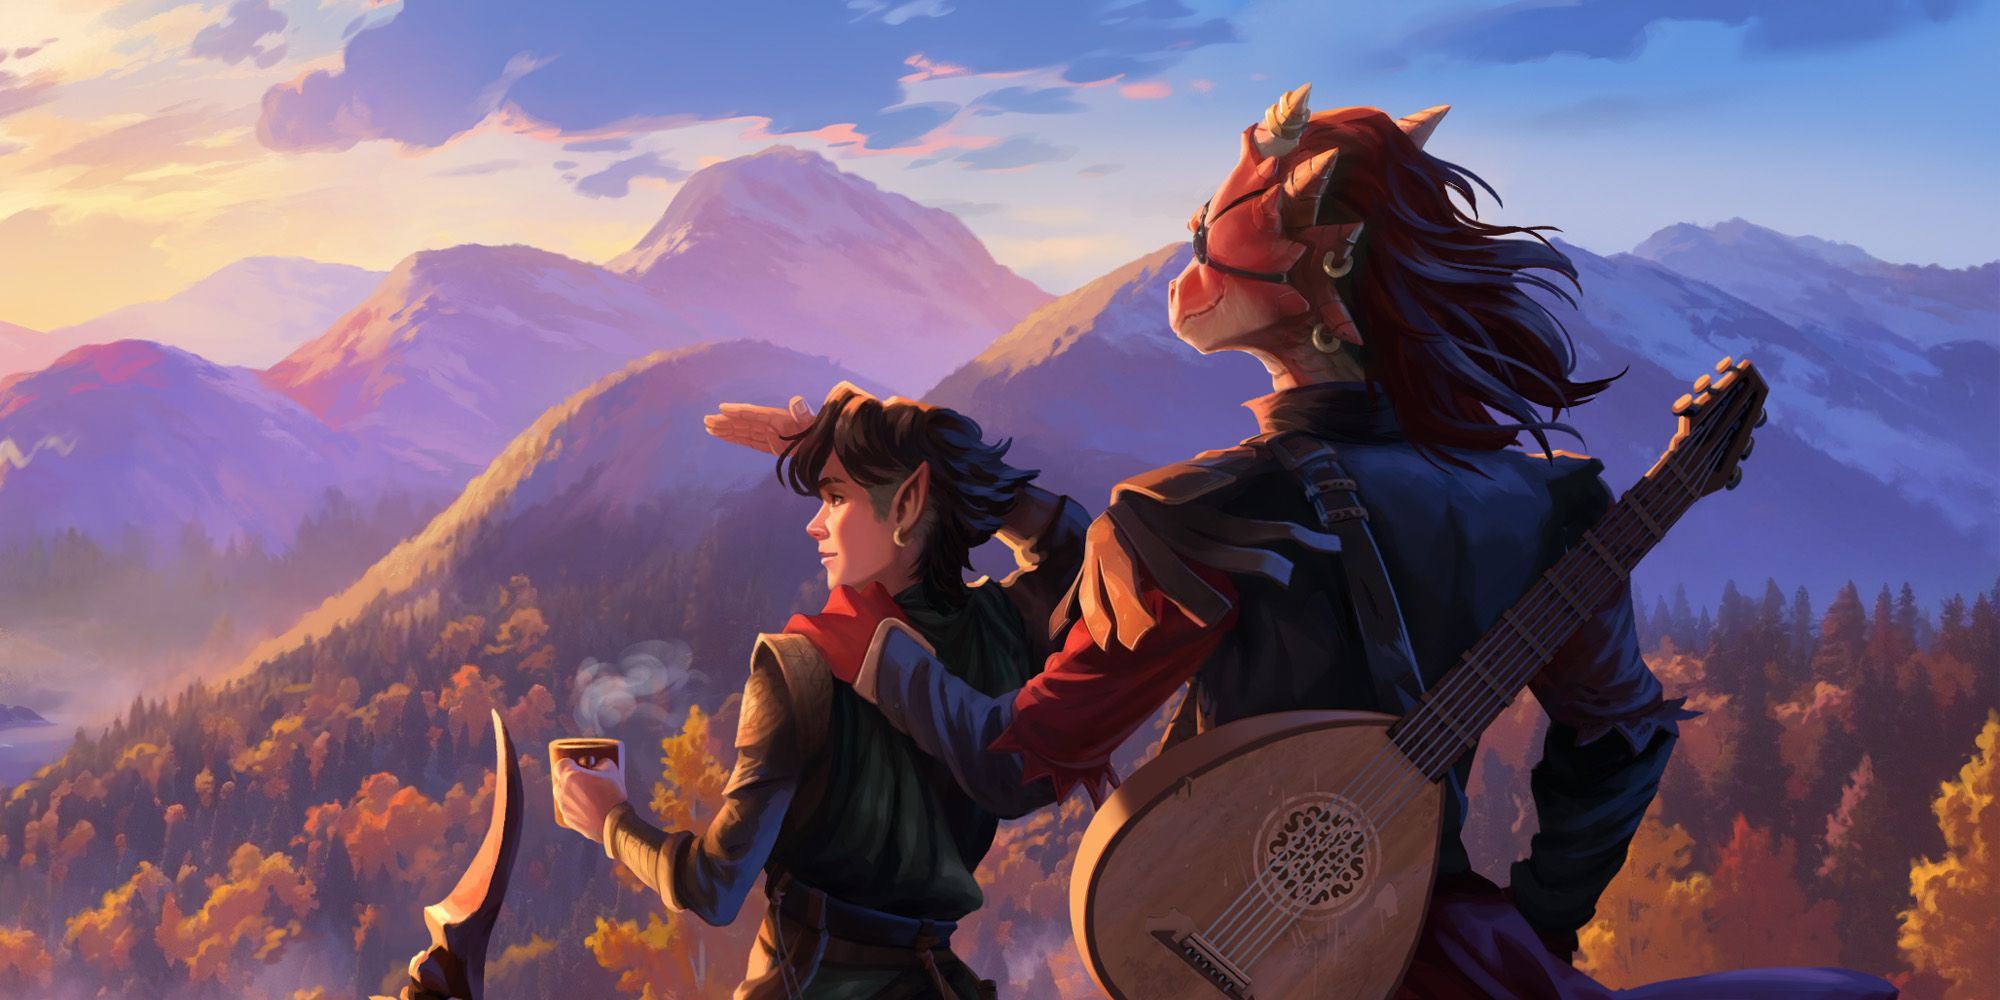 An elven character and a Dragonborn looking out at the horizon in key art for an upcoming Gameloft D&D game.